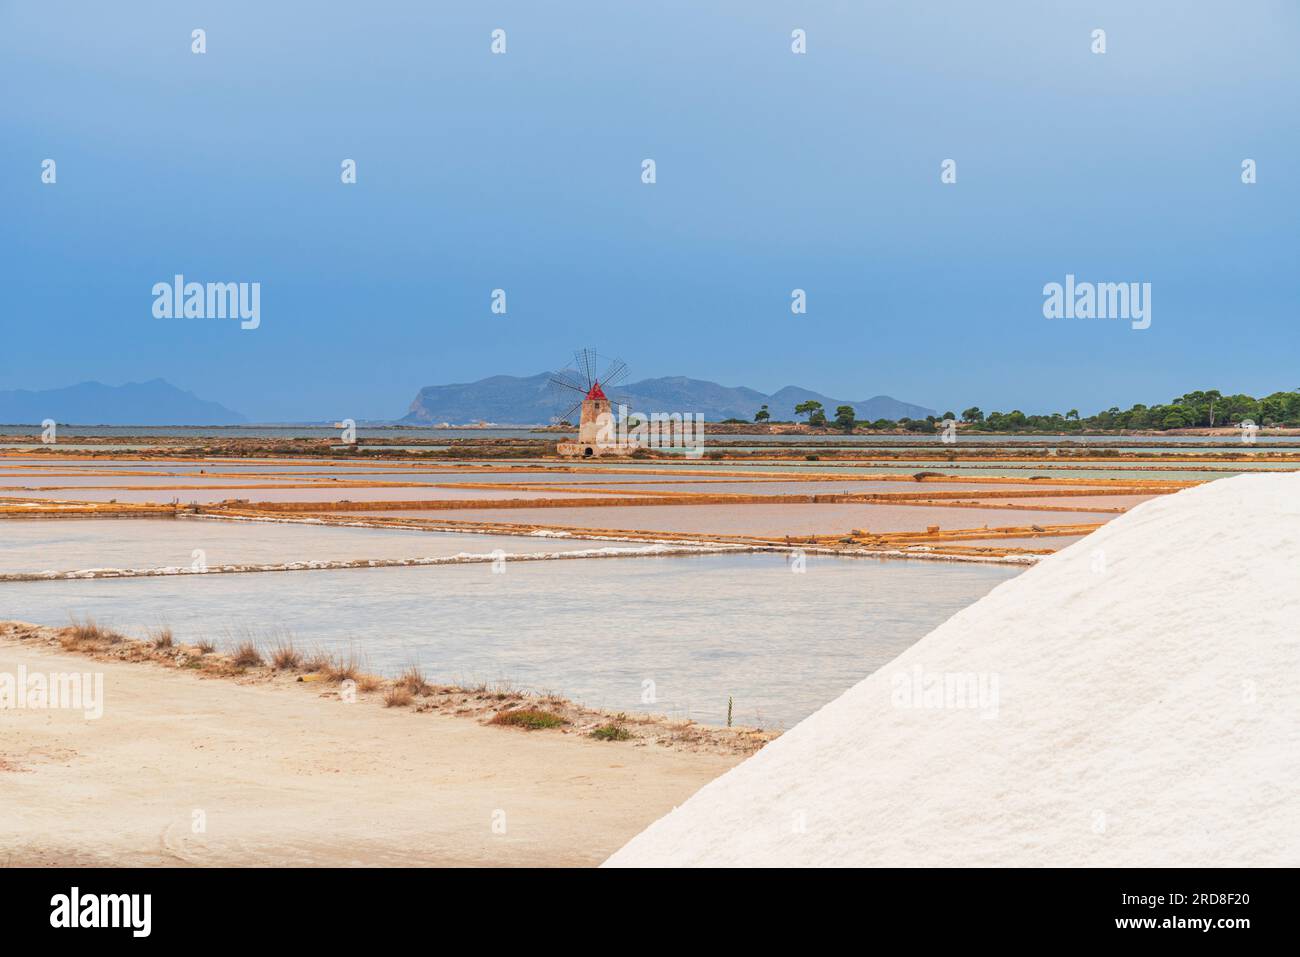 Windmill with pile of salt in the salt flats, Saline Ettore e Infersa, Marsala, province of Trapani, Sicily, Italy, Mediterranean, Europe Stock Photo